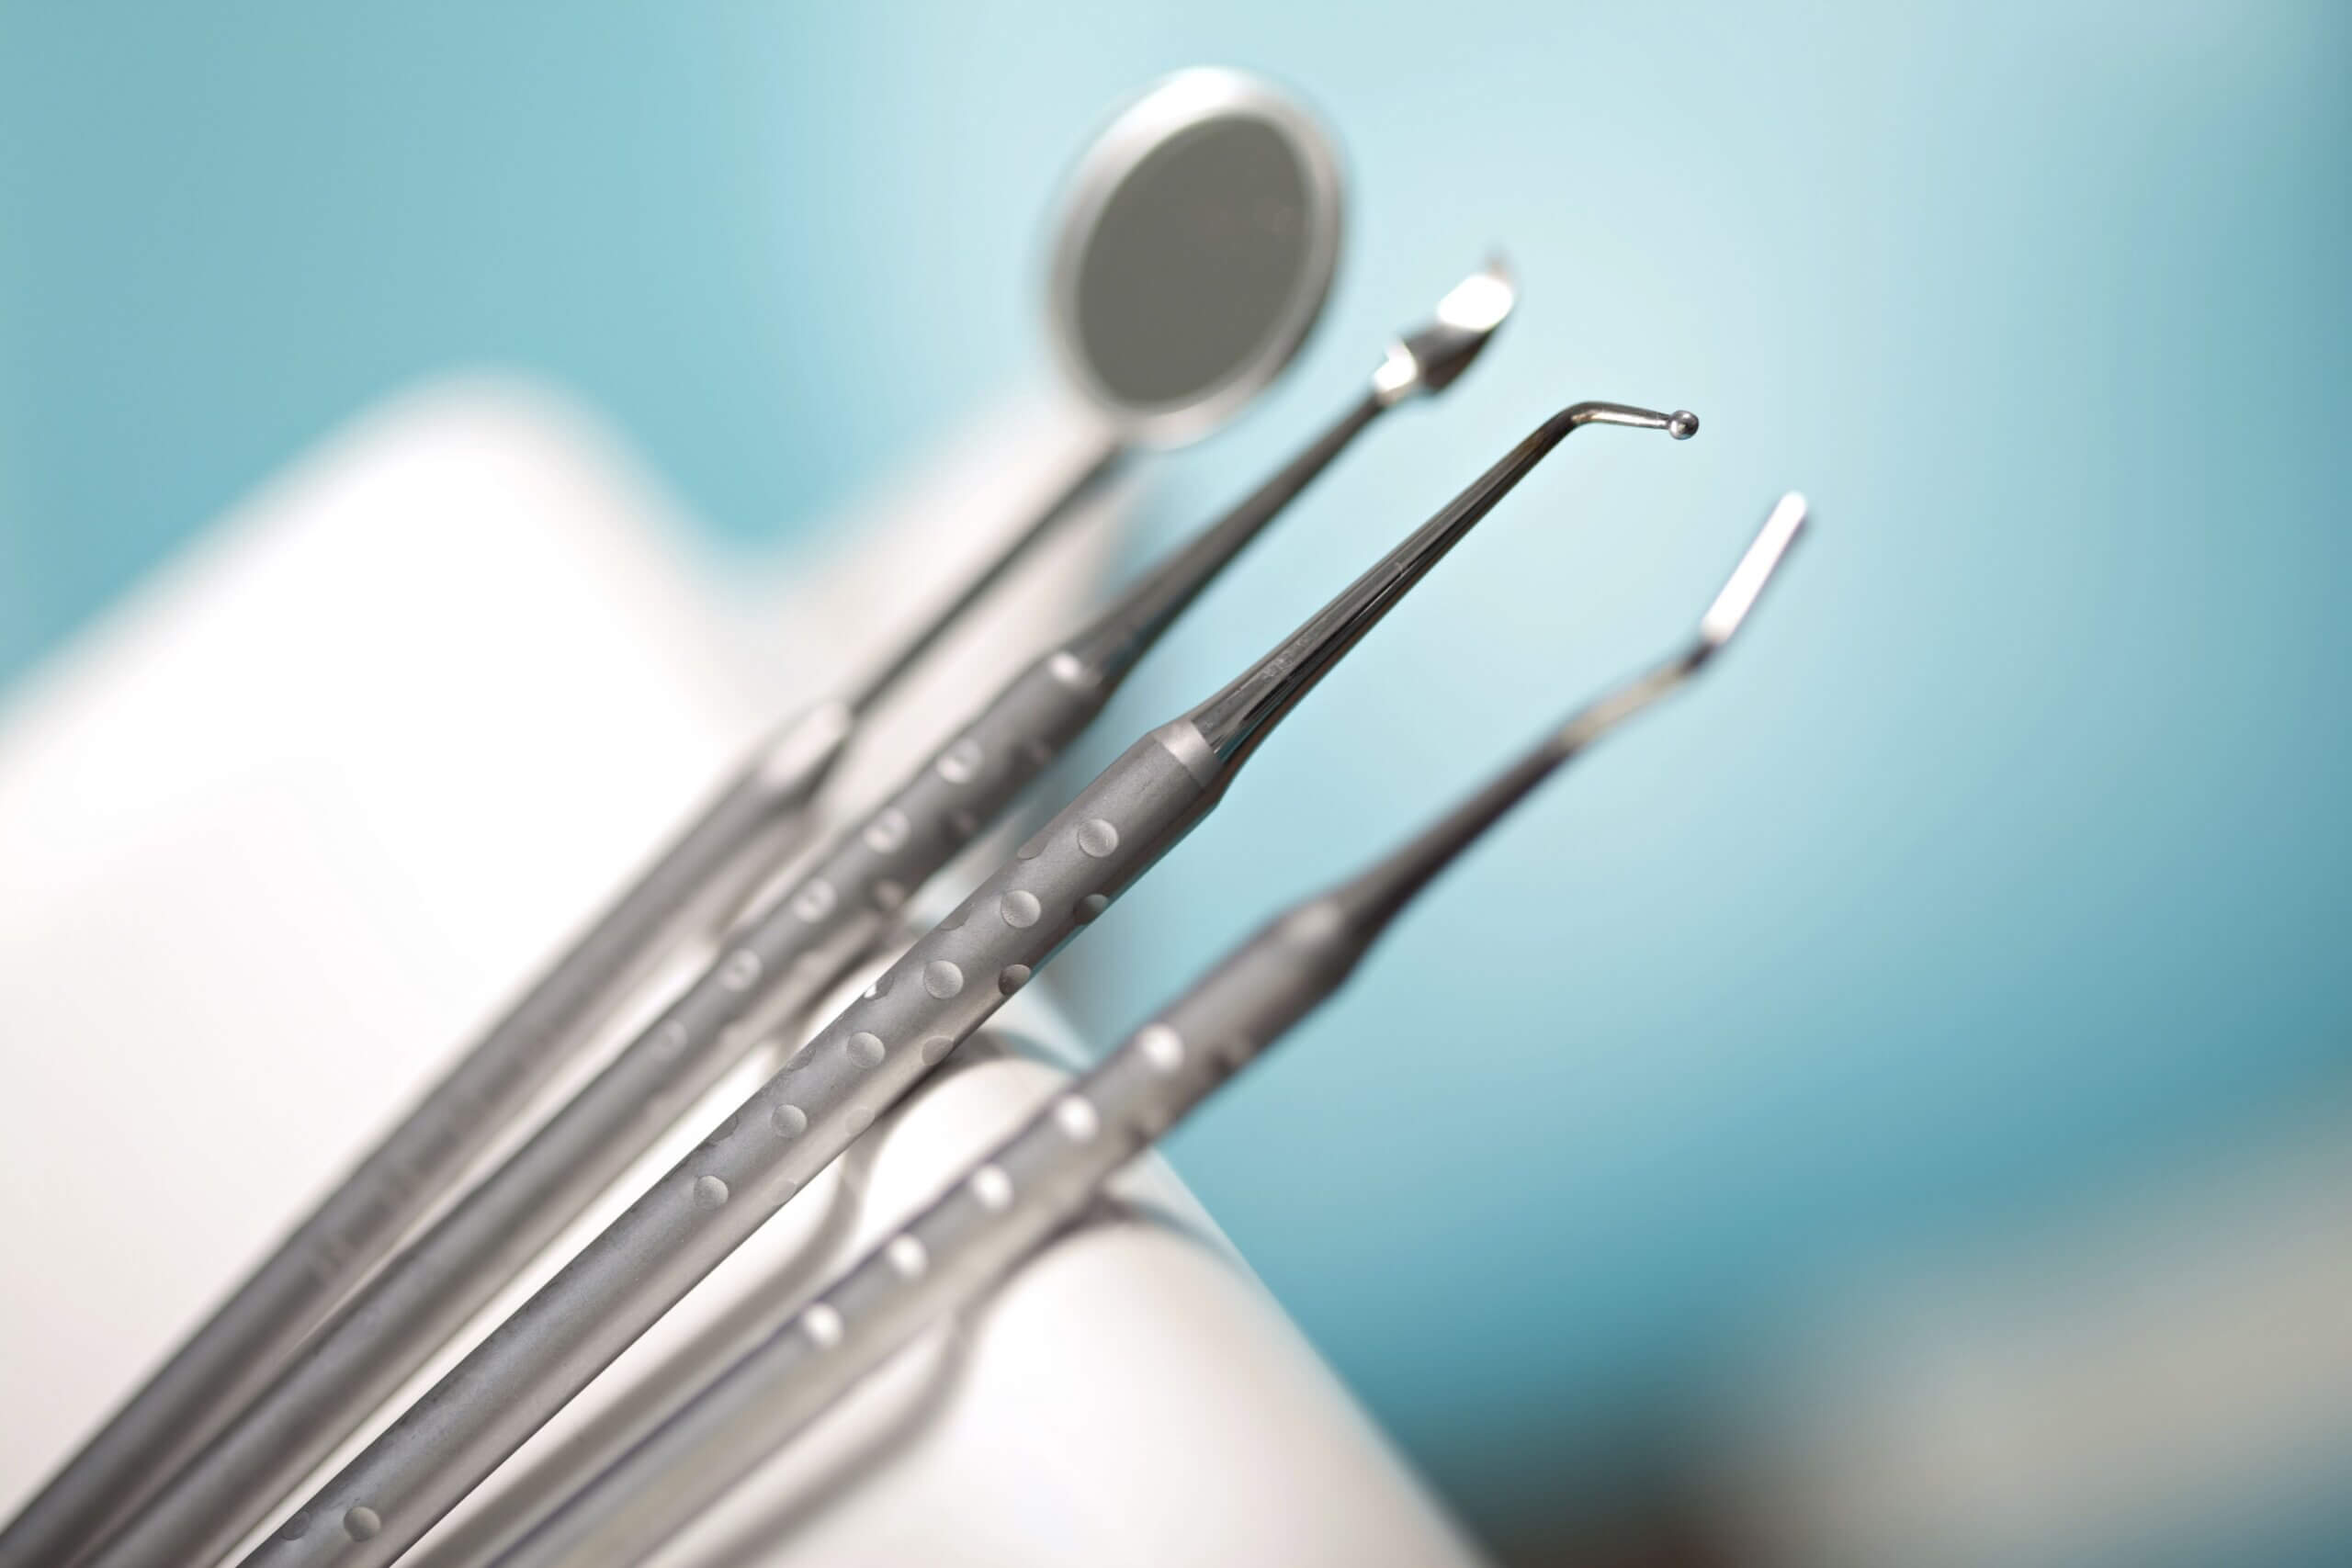 Blurred Dental Surgery Tools on Blue Background